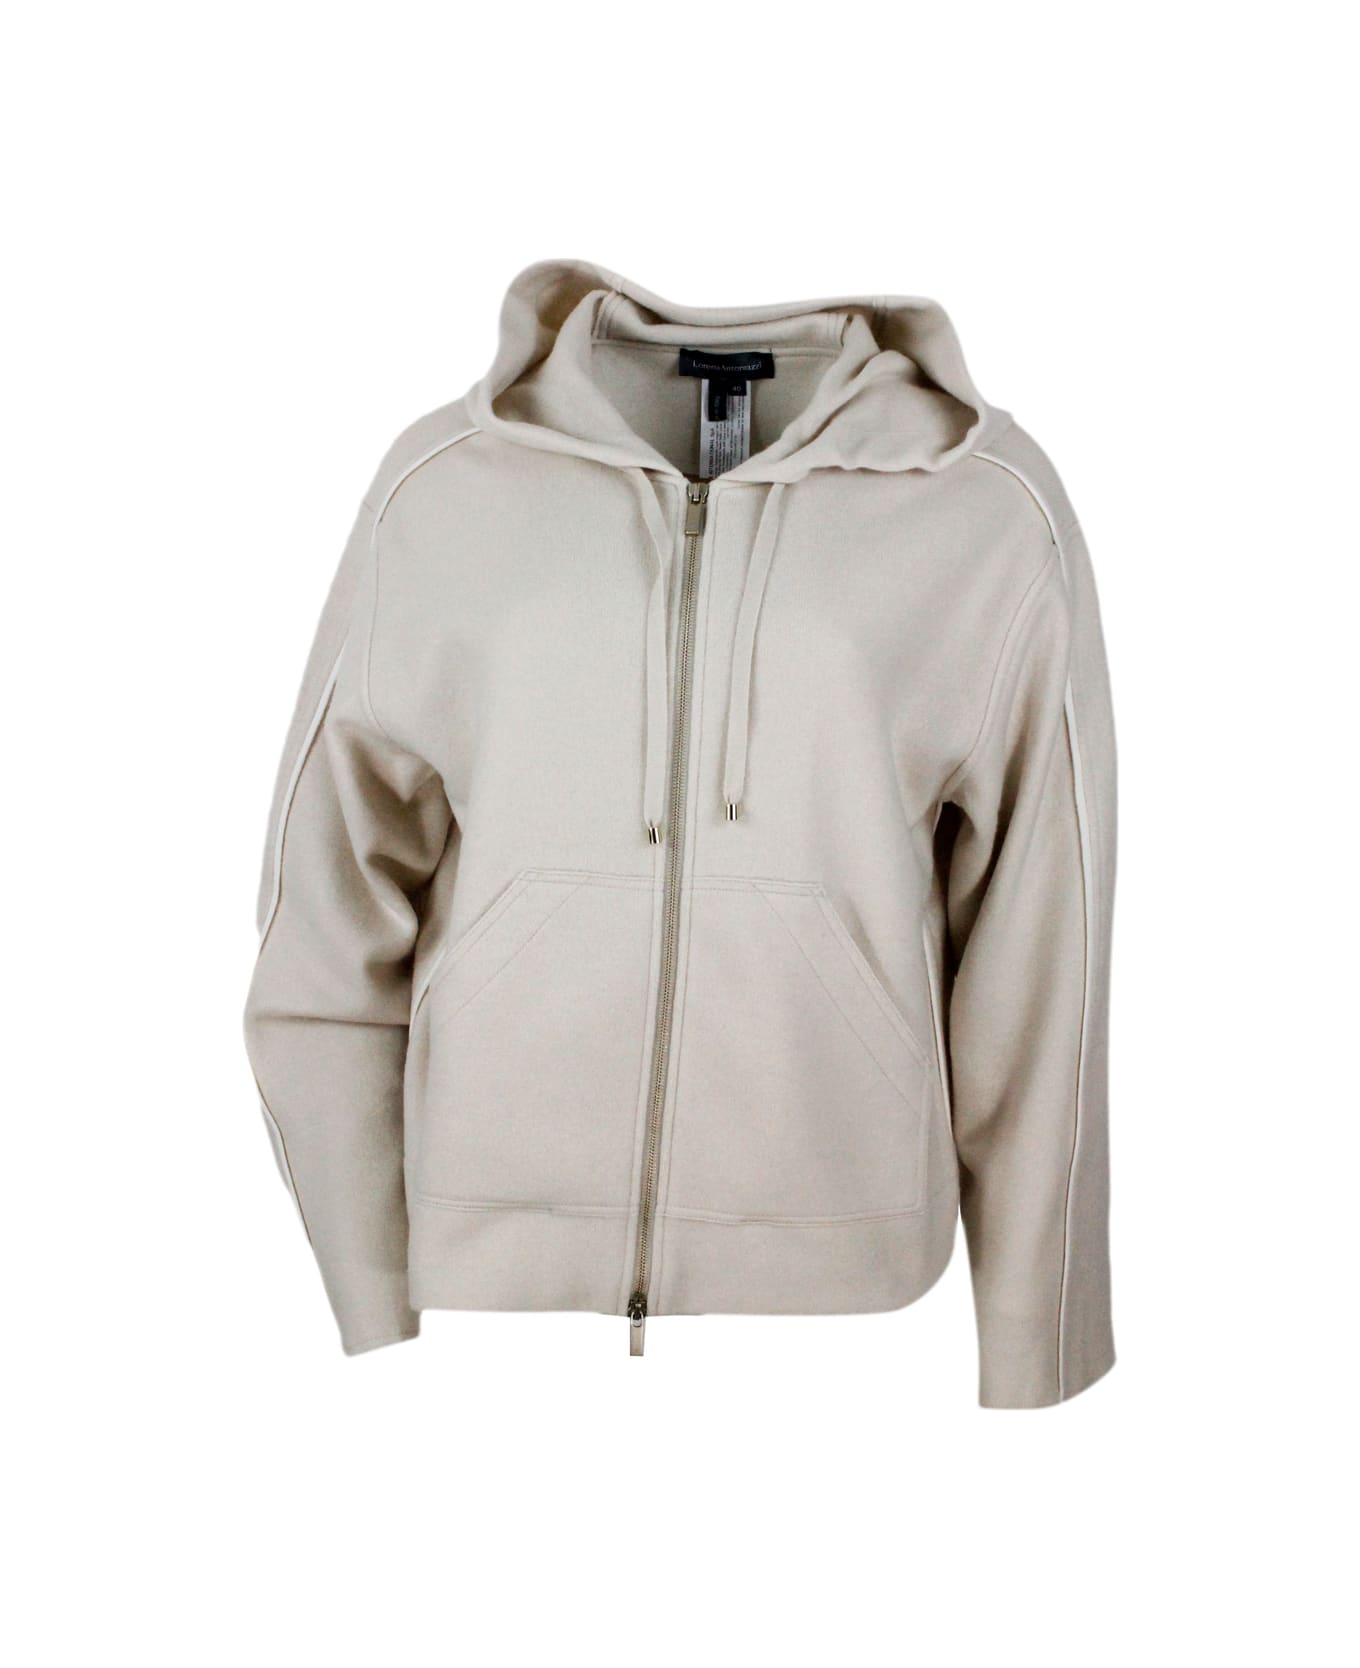 Lorena Antoniazzi Sweatshirt-style Hooded WIP With Drawstring And Zip Closure Made Of Wool, Cashmere And Silk - Beige